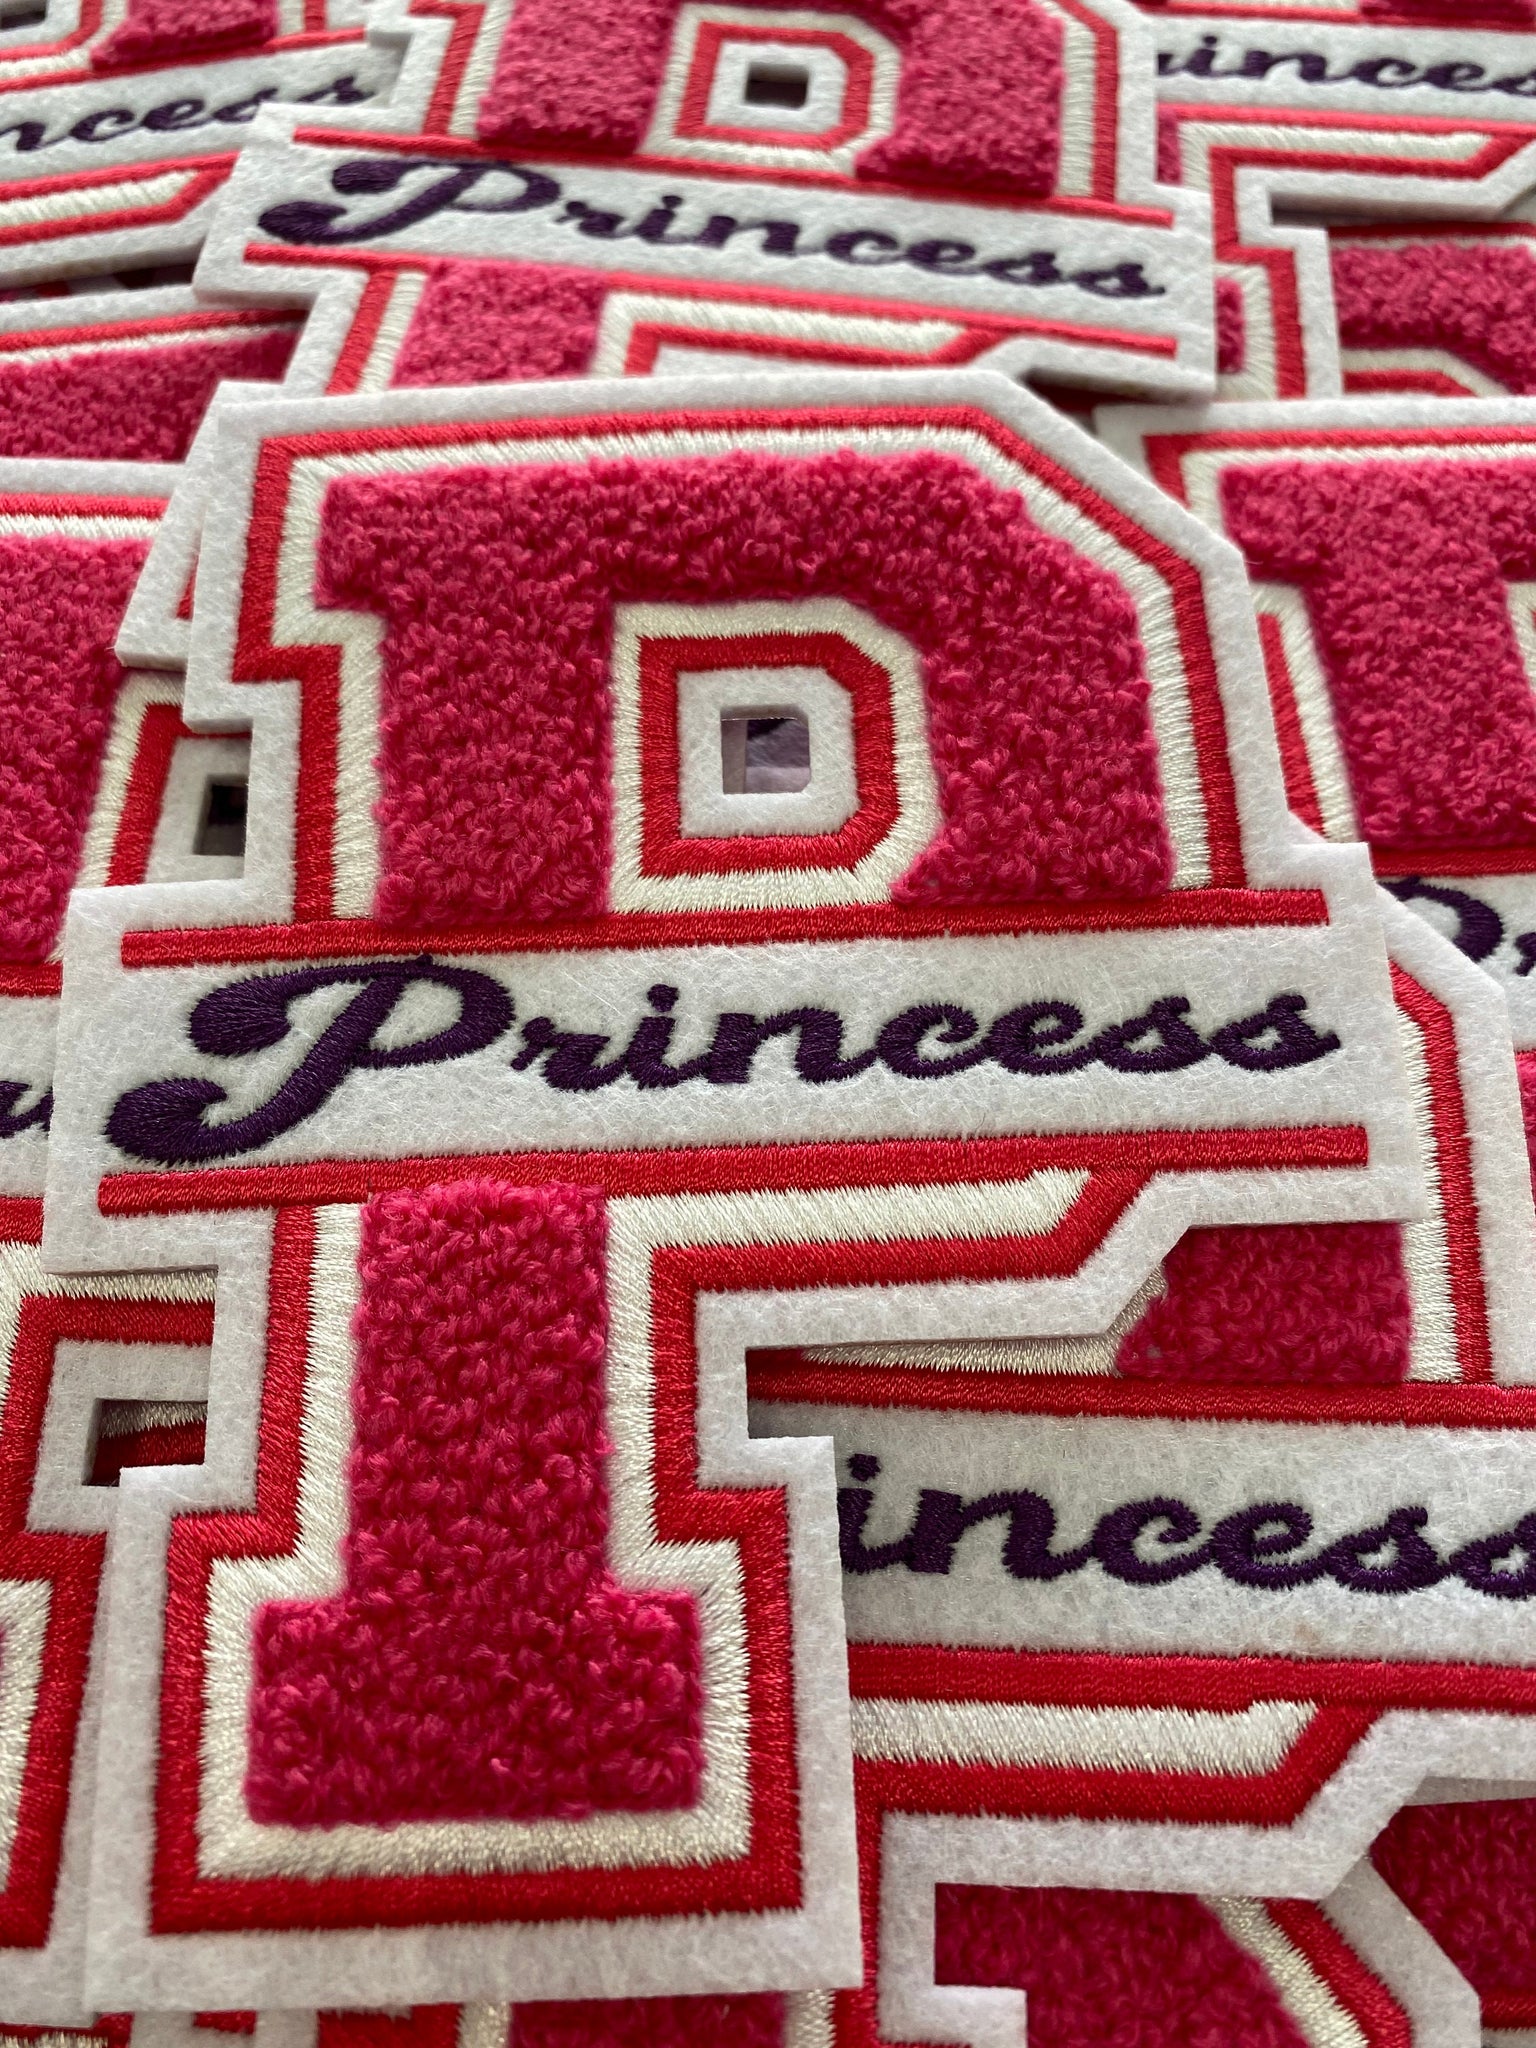 Black-History-Sale Monogram Letter, "P" Embroidered Word PRINCESS, Pink, Red, White, Size 6", Iron-on Backing, Medium Applique, Varsity